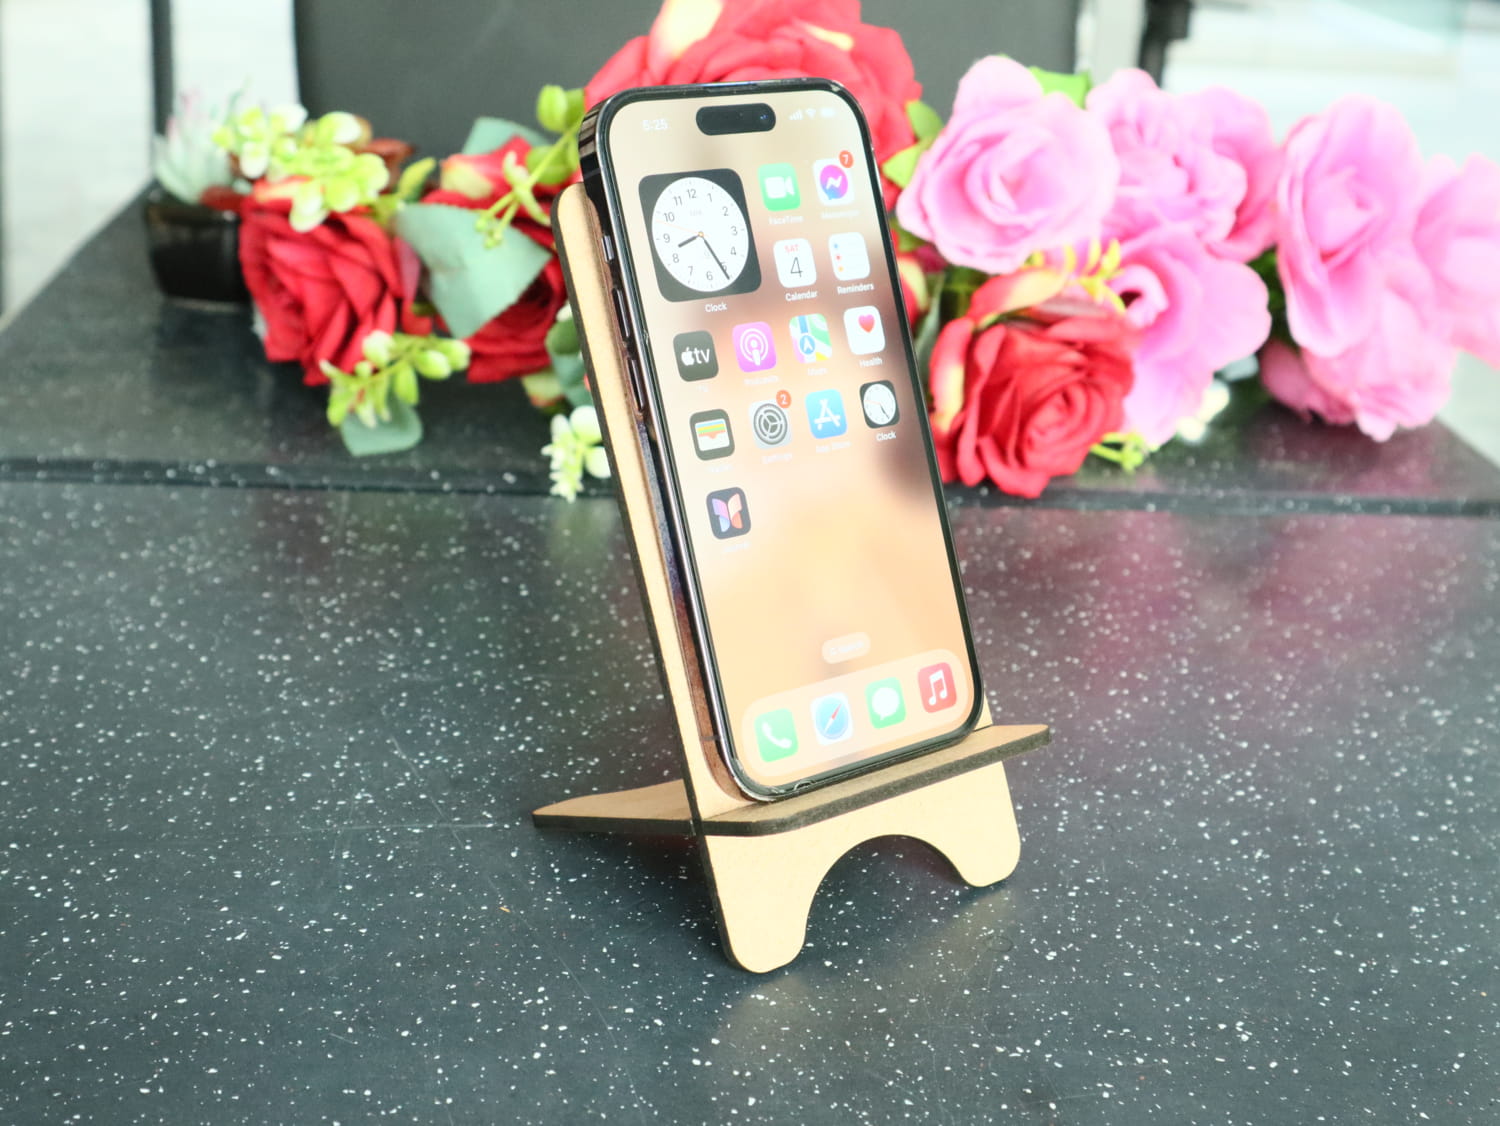 Laser Cut Wooden iPhone Stand Free Vector